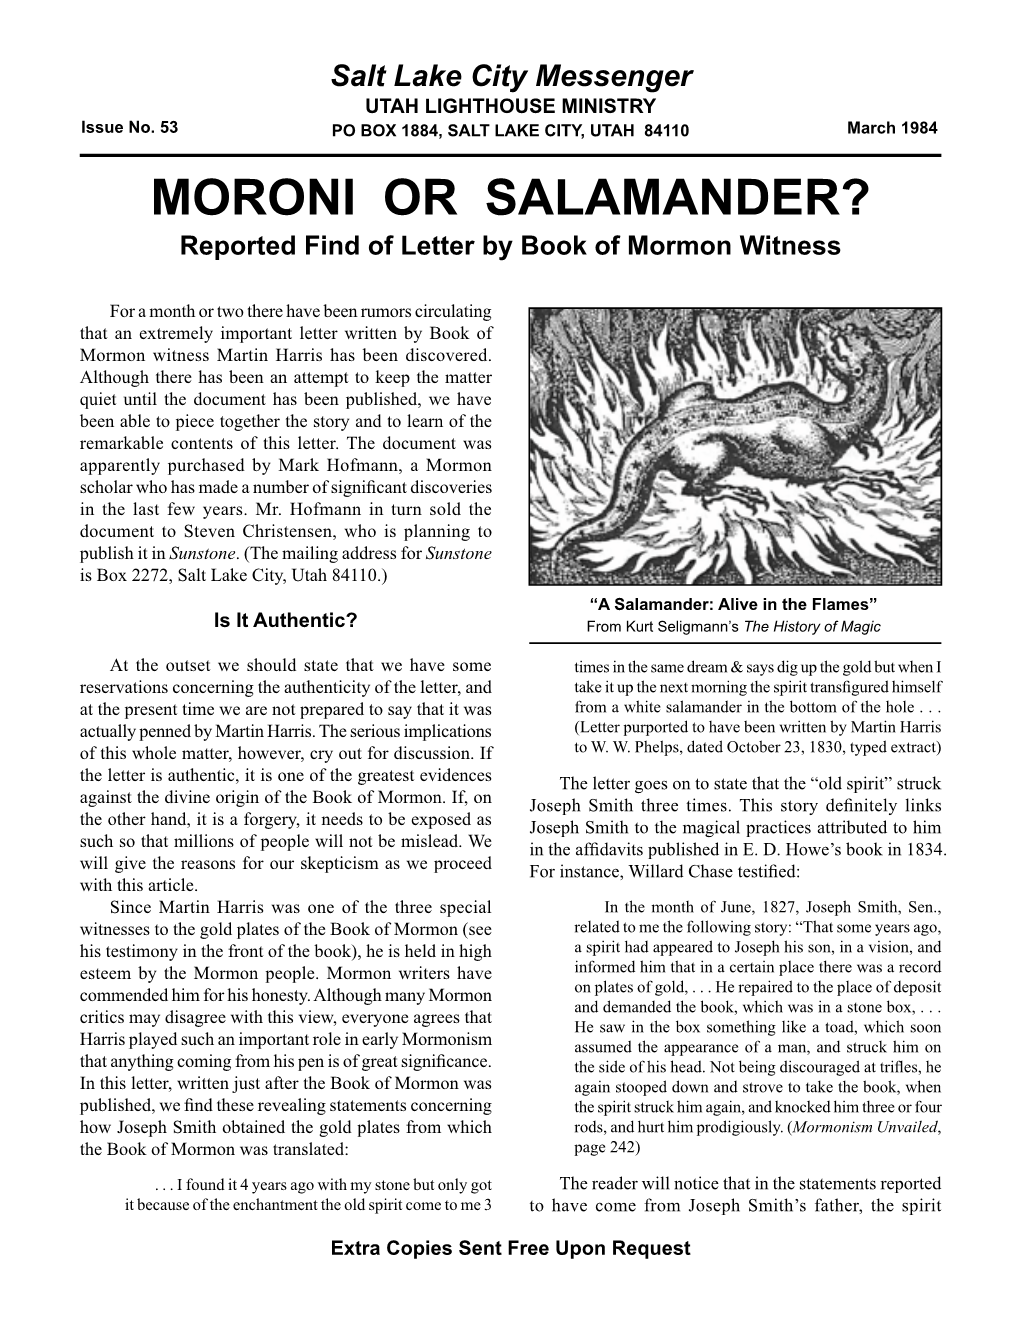 MORONI OR SALAMANDER? Reported Find of Letter by Book of Mormon Witness